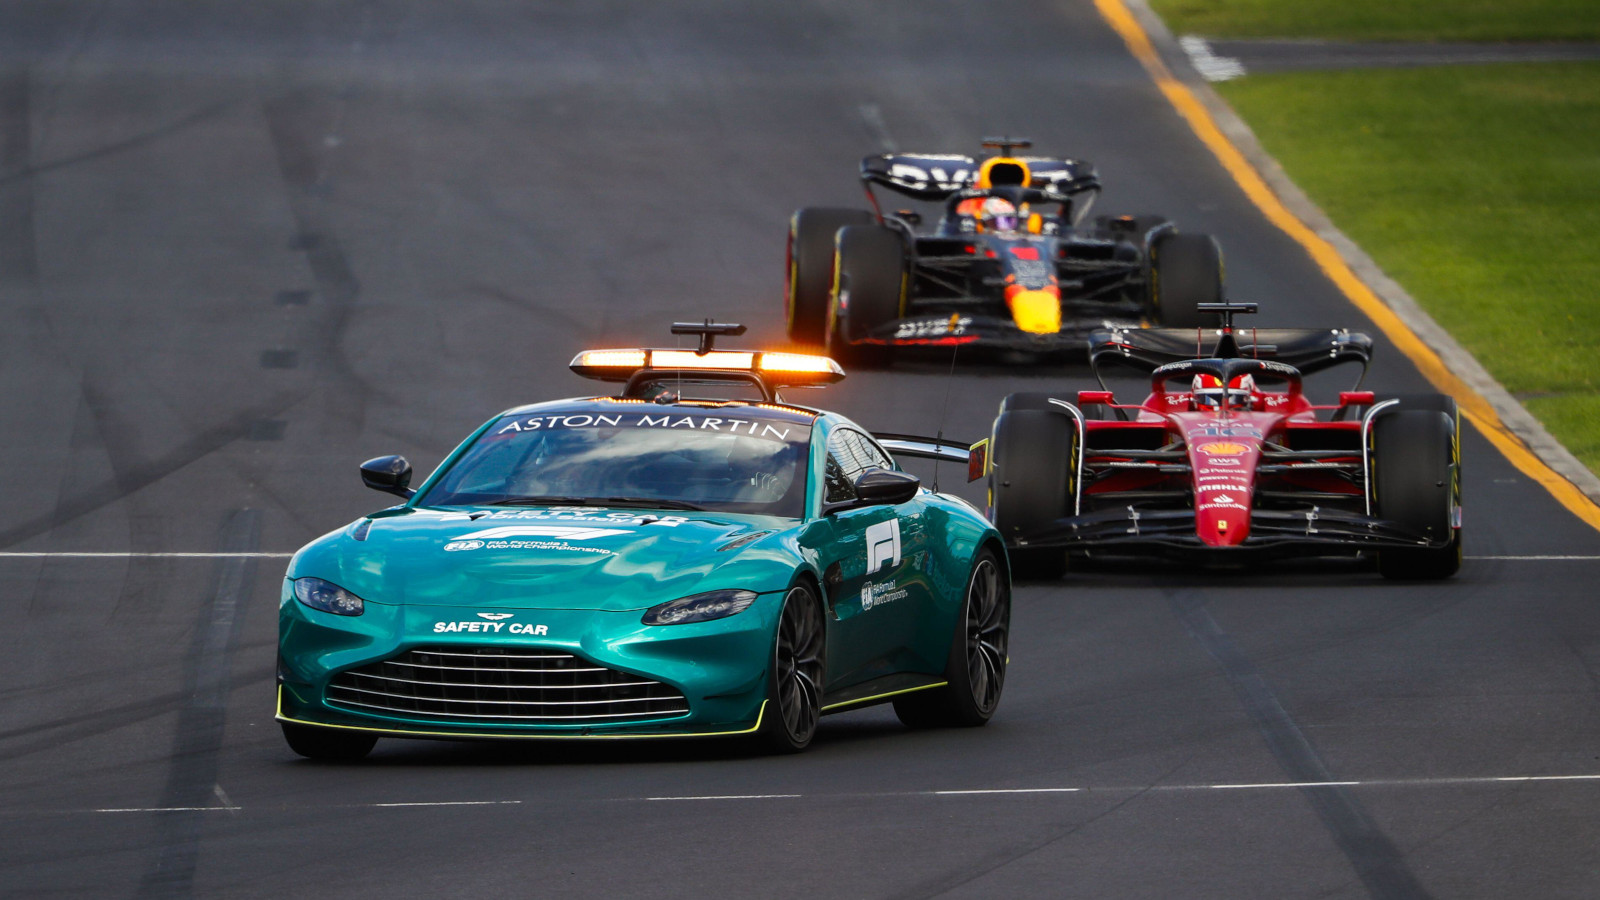 Charles Leclerc and Max Verstappen behind the Safety Car. Australia April 2022